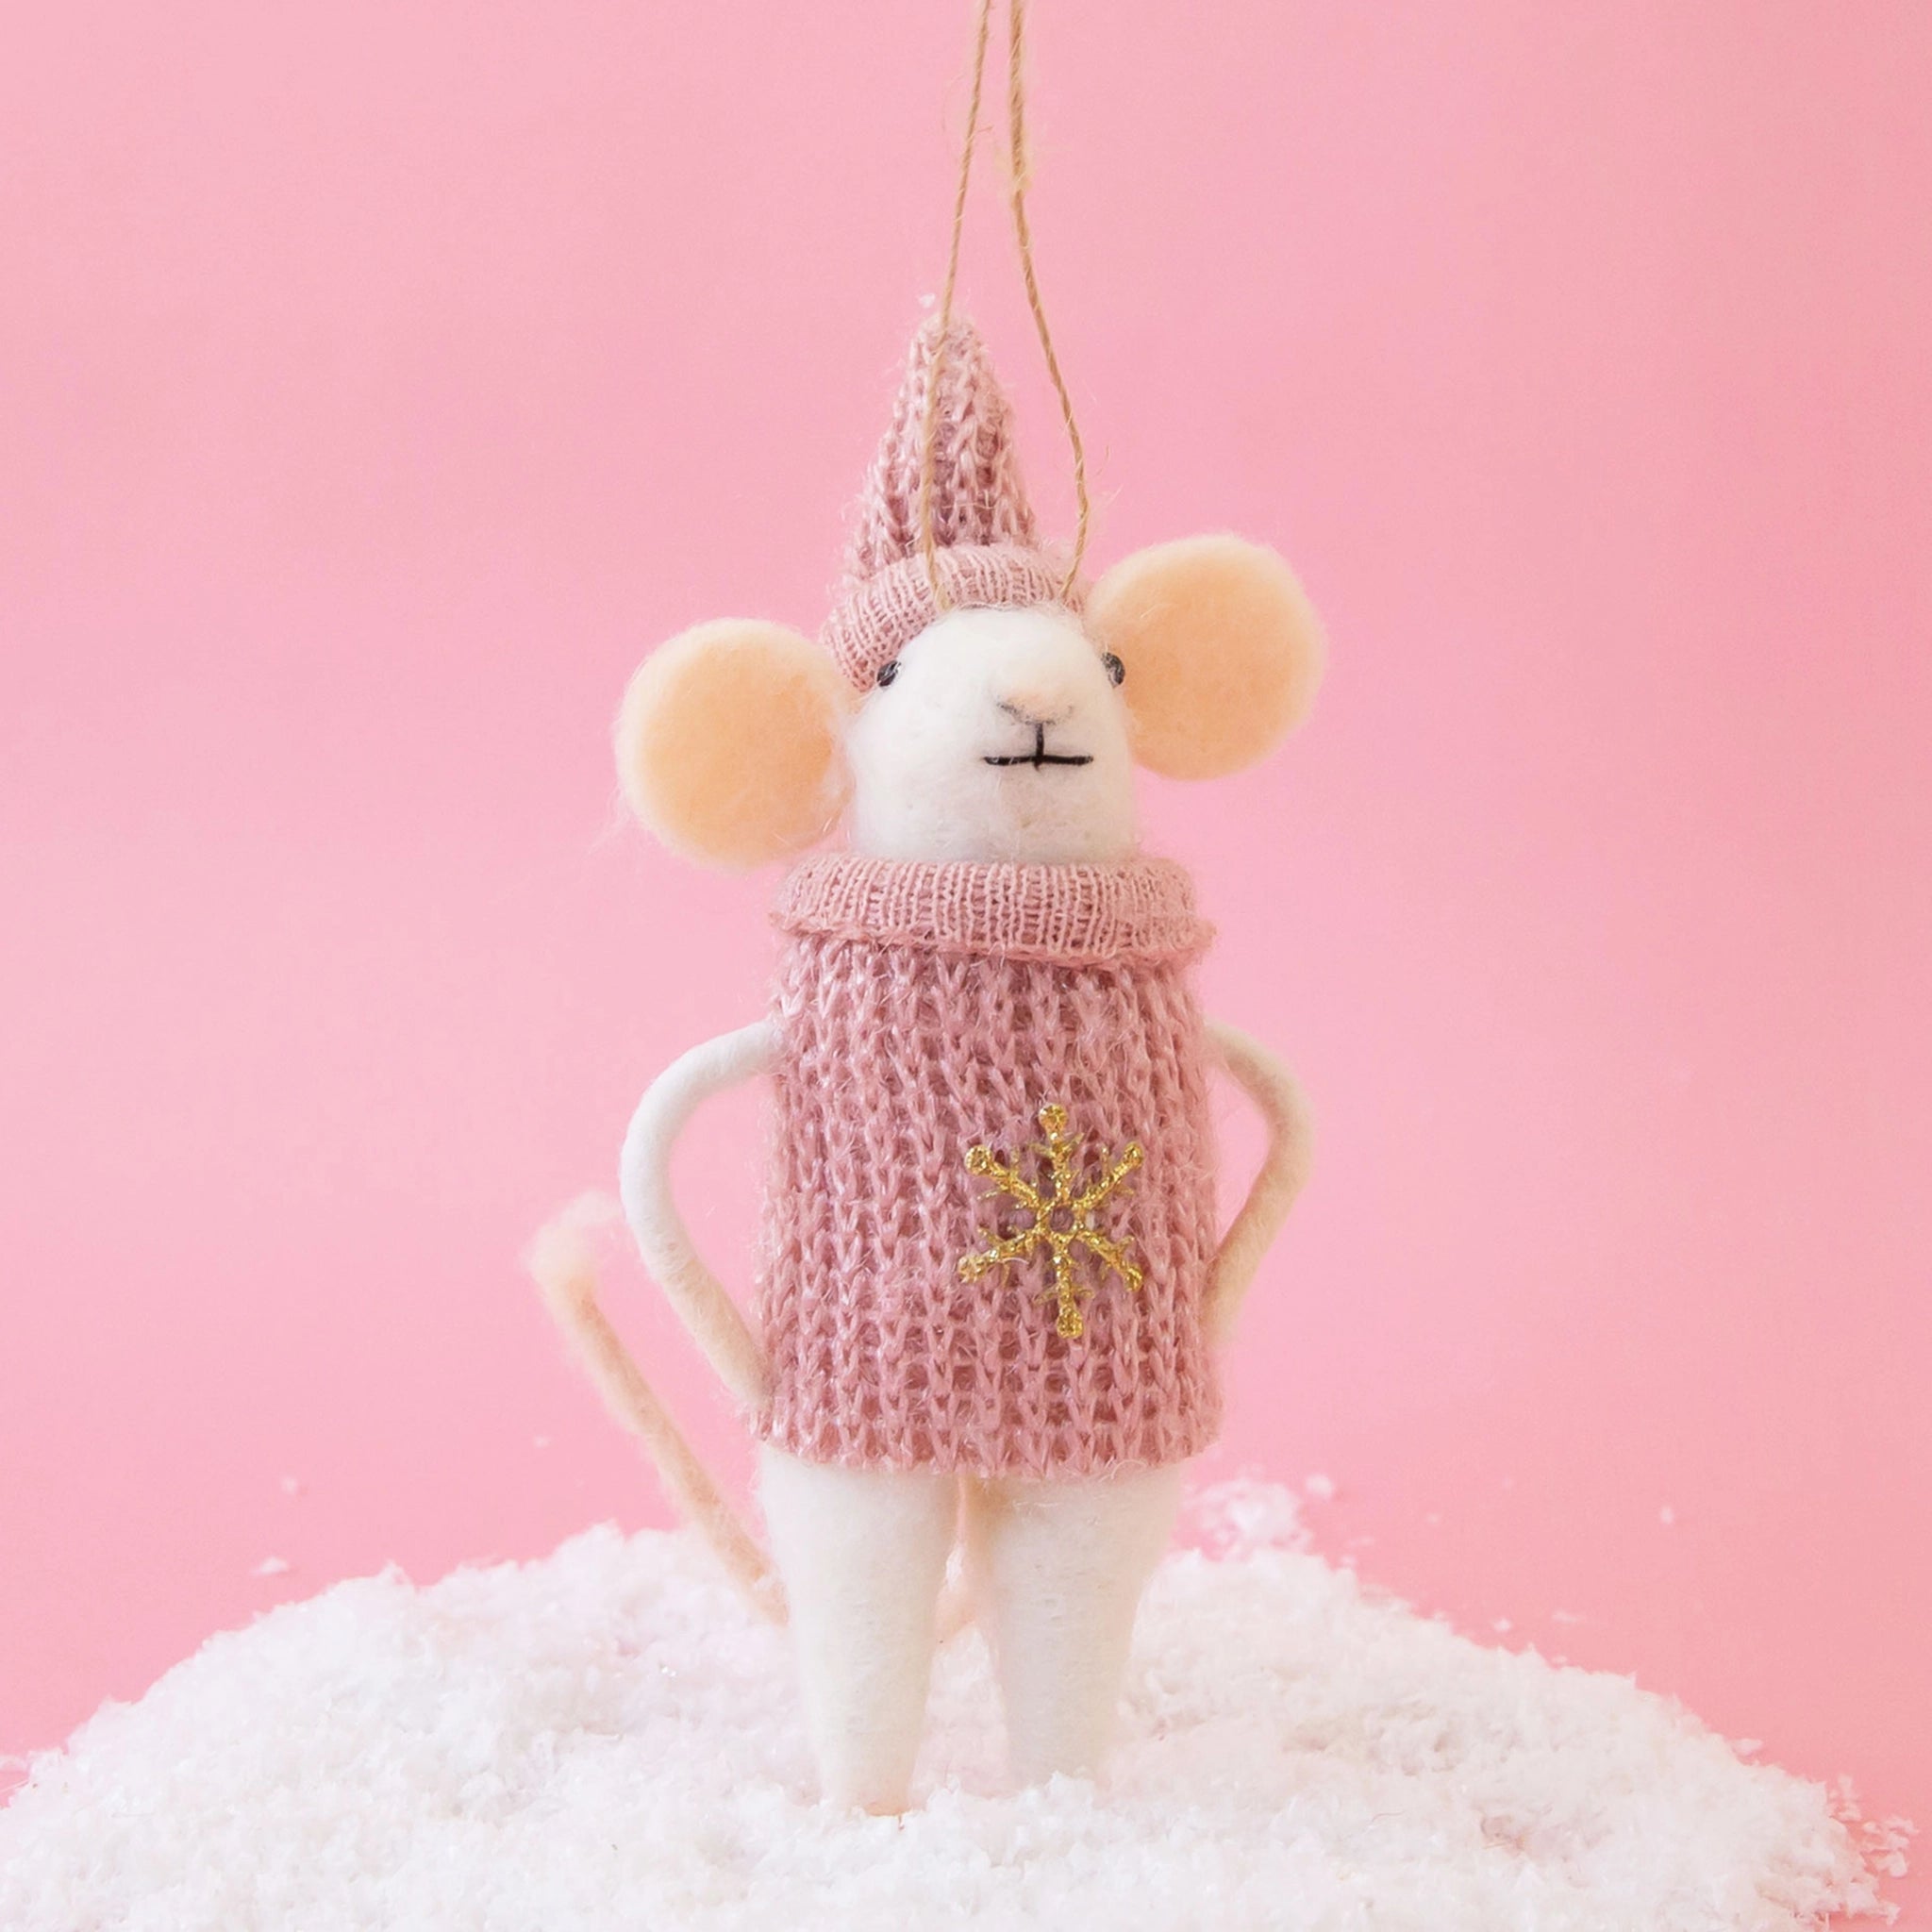 On a pink background is a white felt mouse ornament dressed in a pink knit sweater with a gold snowflake in the center and a pink matching hat. 